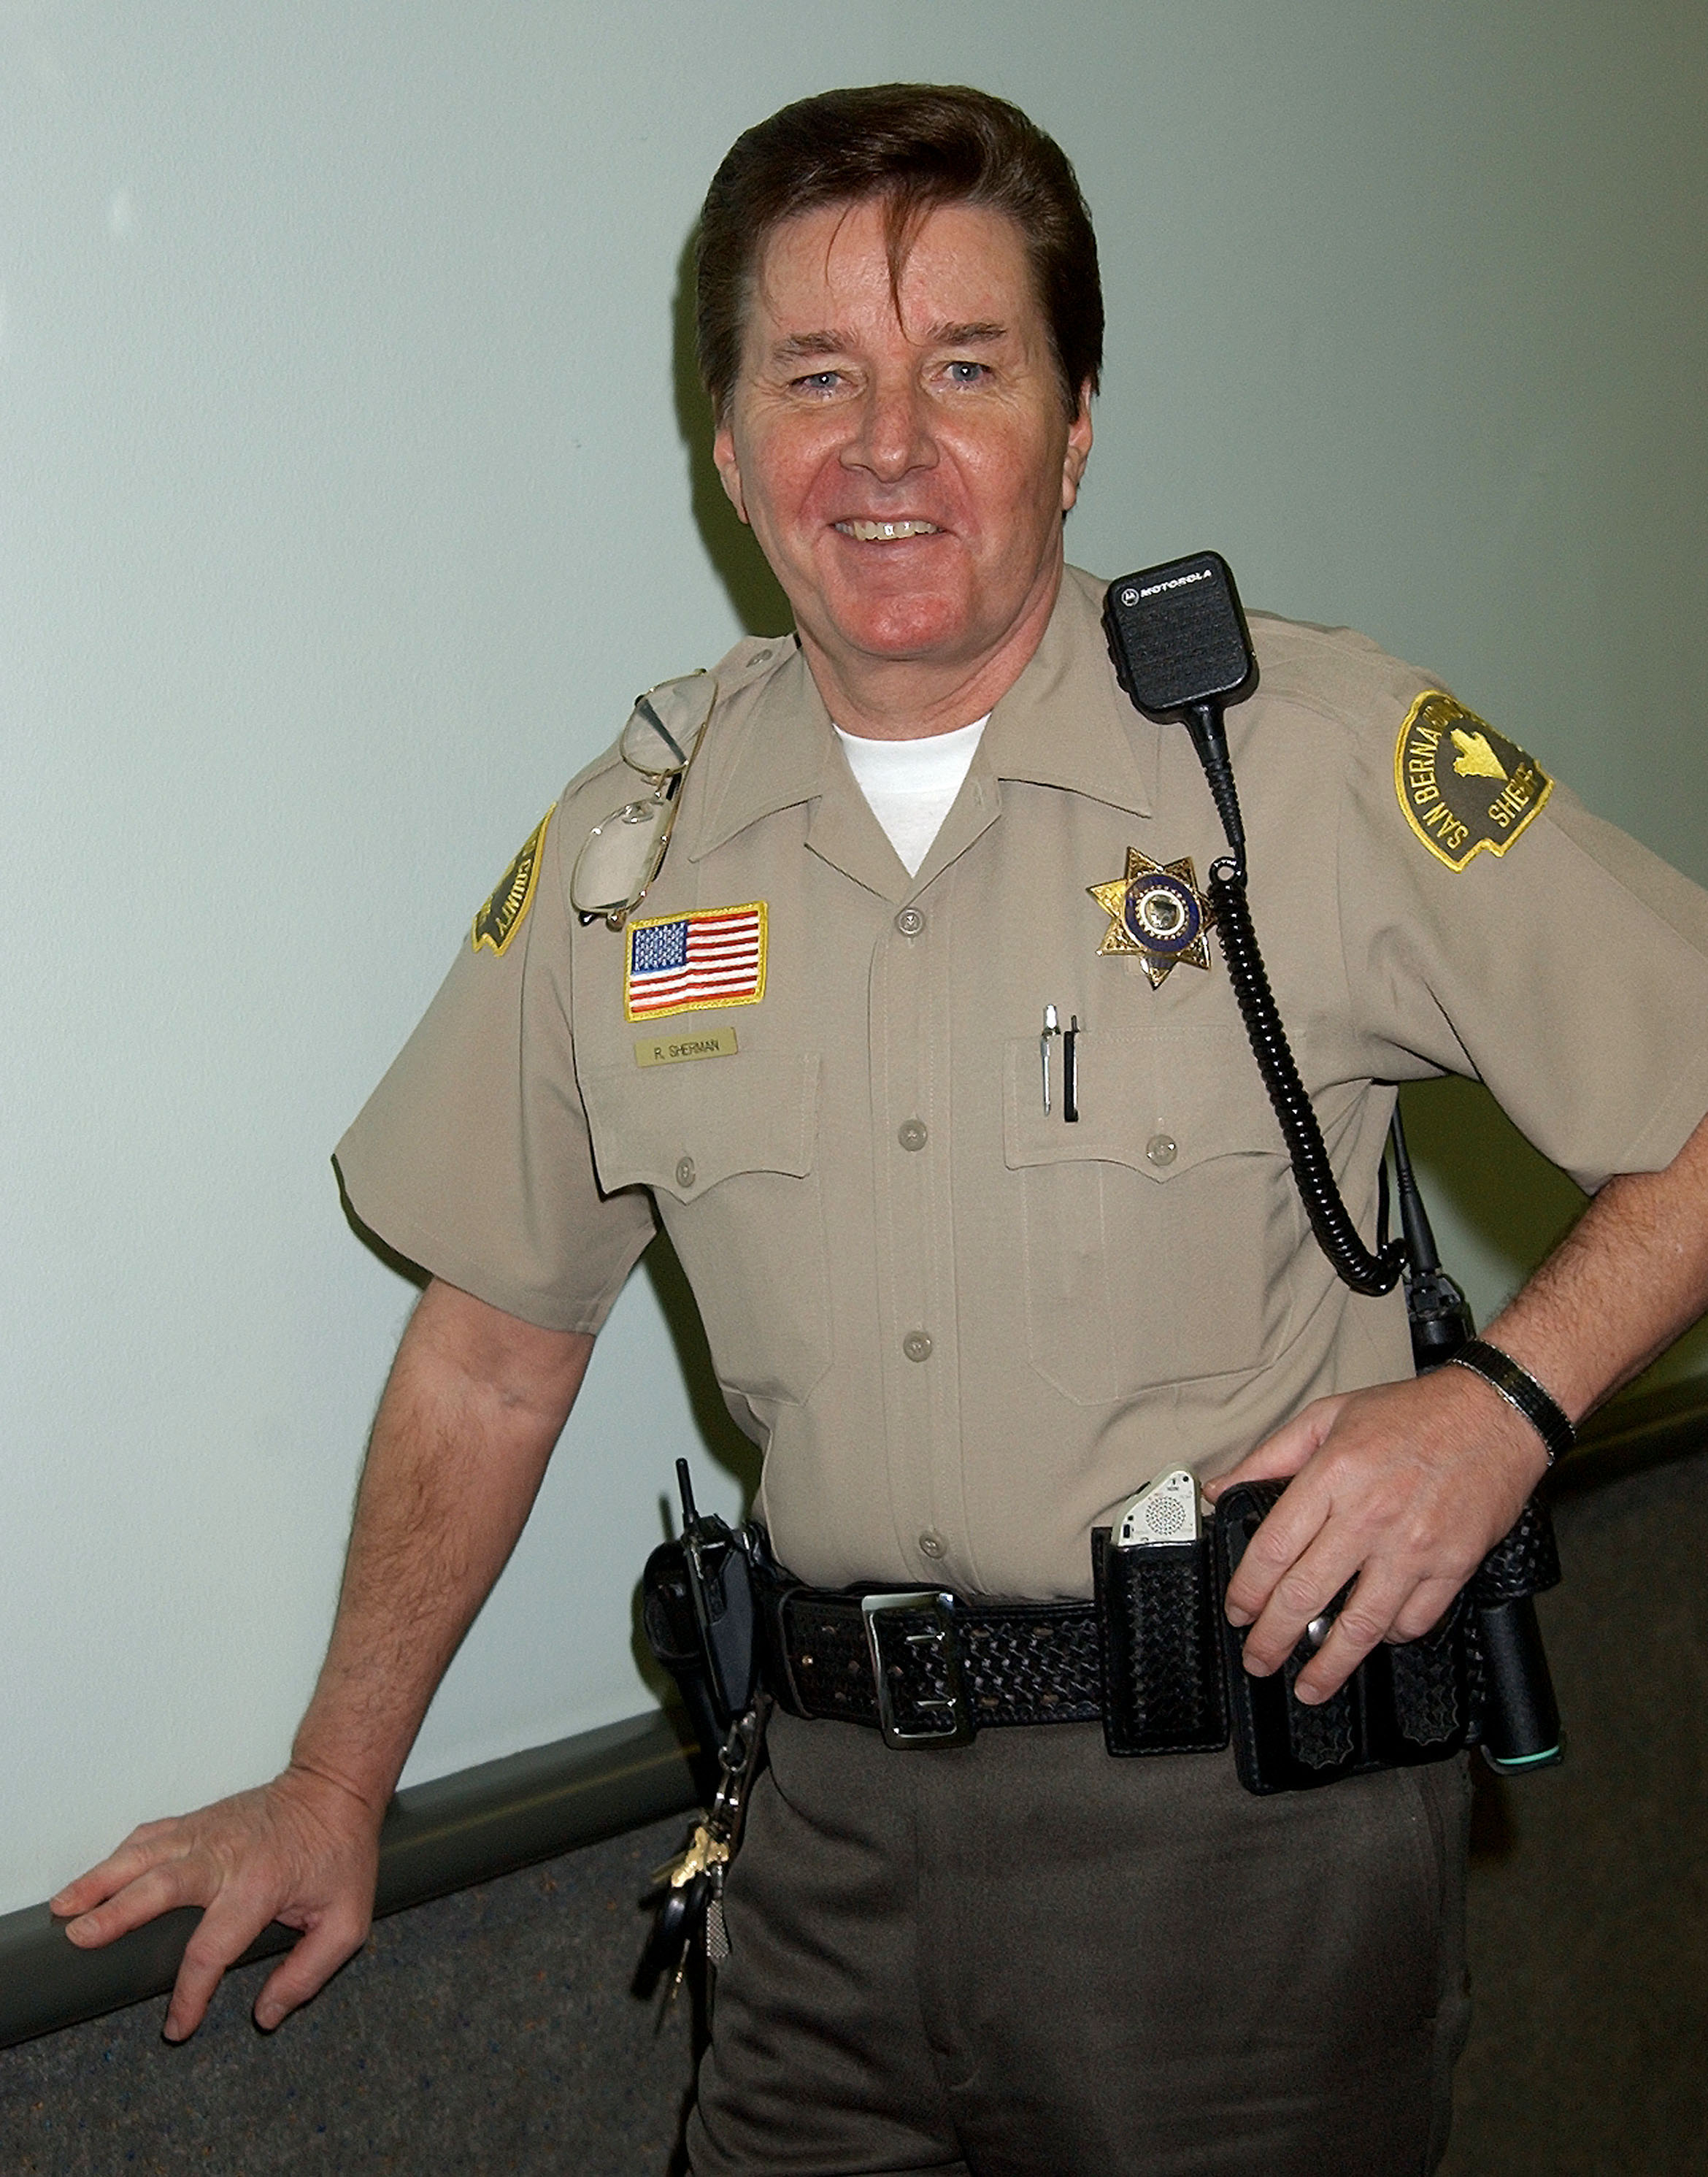 Bobby Sherman, who is now a San Bernardino County deputy sheriff, at the Public Access to Defibrillation Conference in Los Angeles on March 6, 2003 | Source: Getty Images